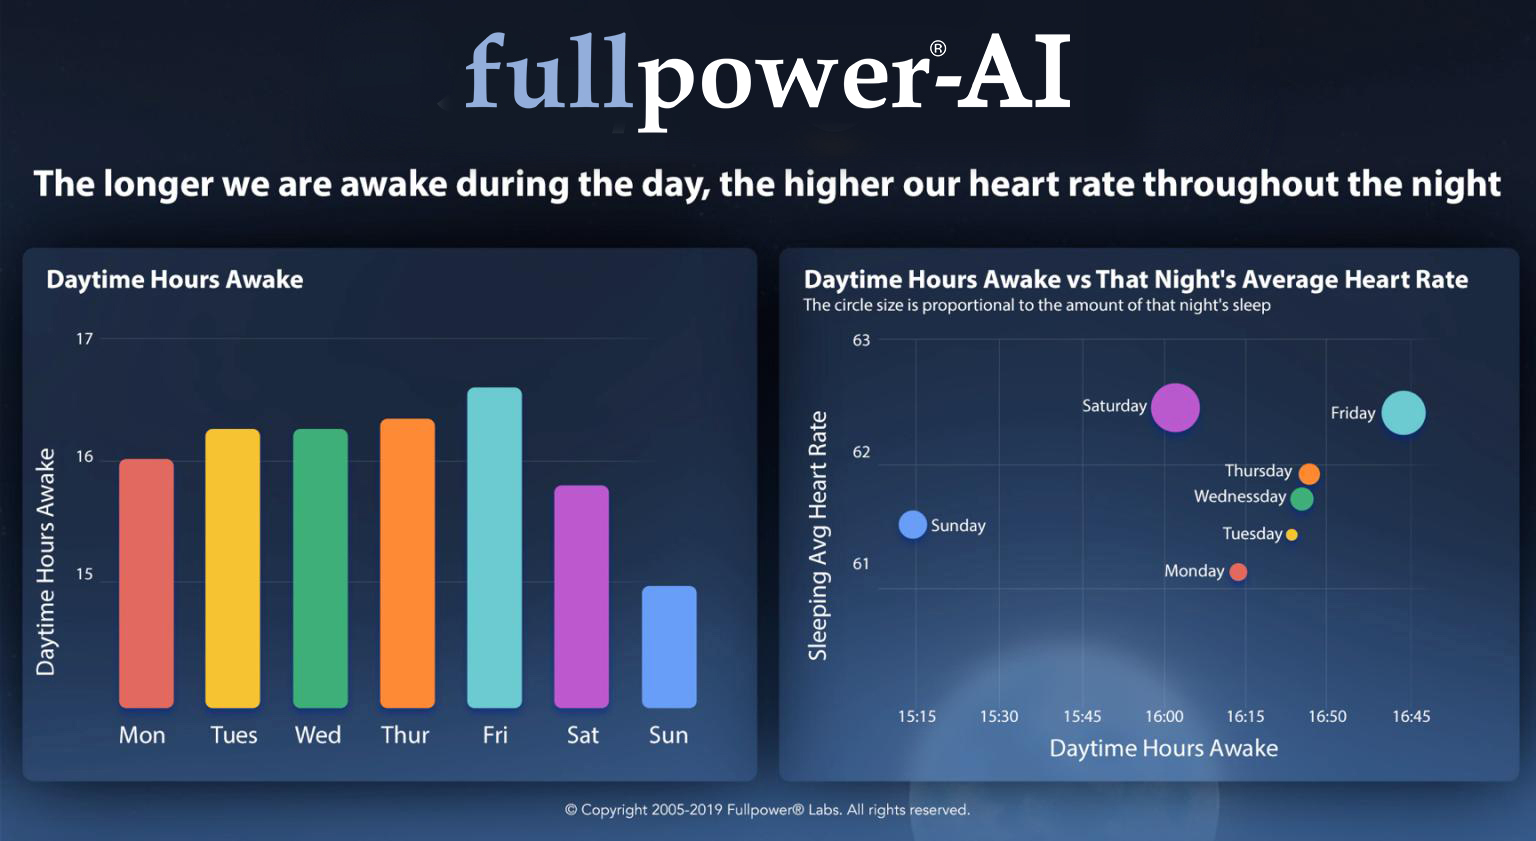 The longer we are awake during the day, the higher our heart rate throughout the night